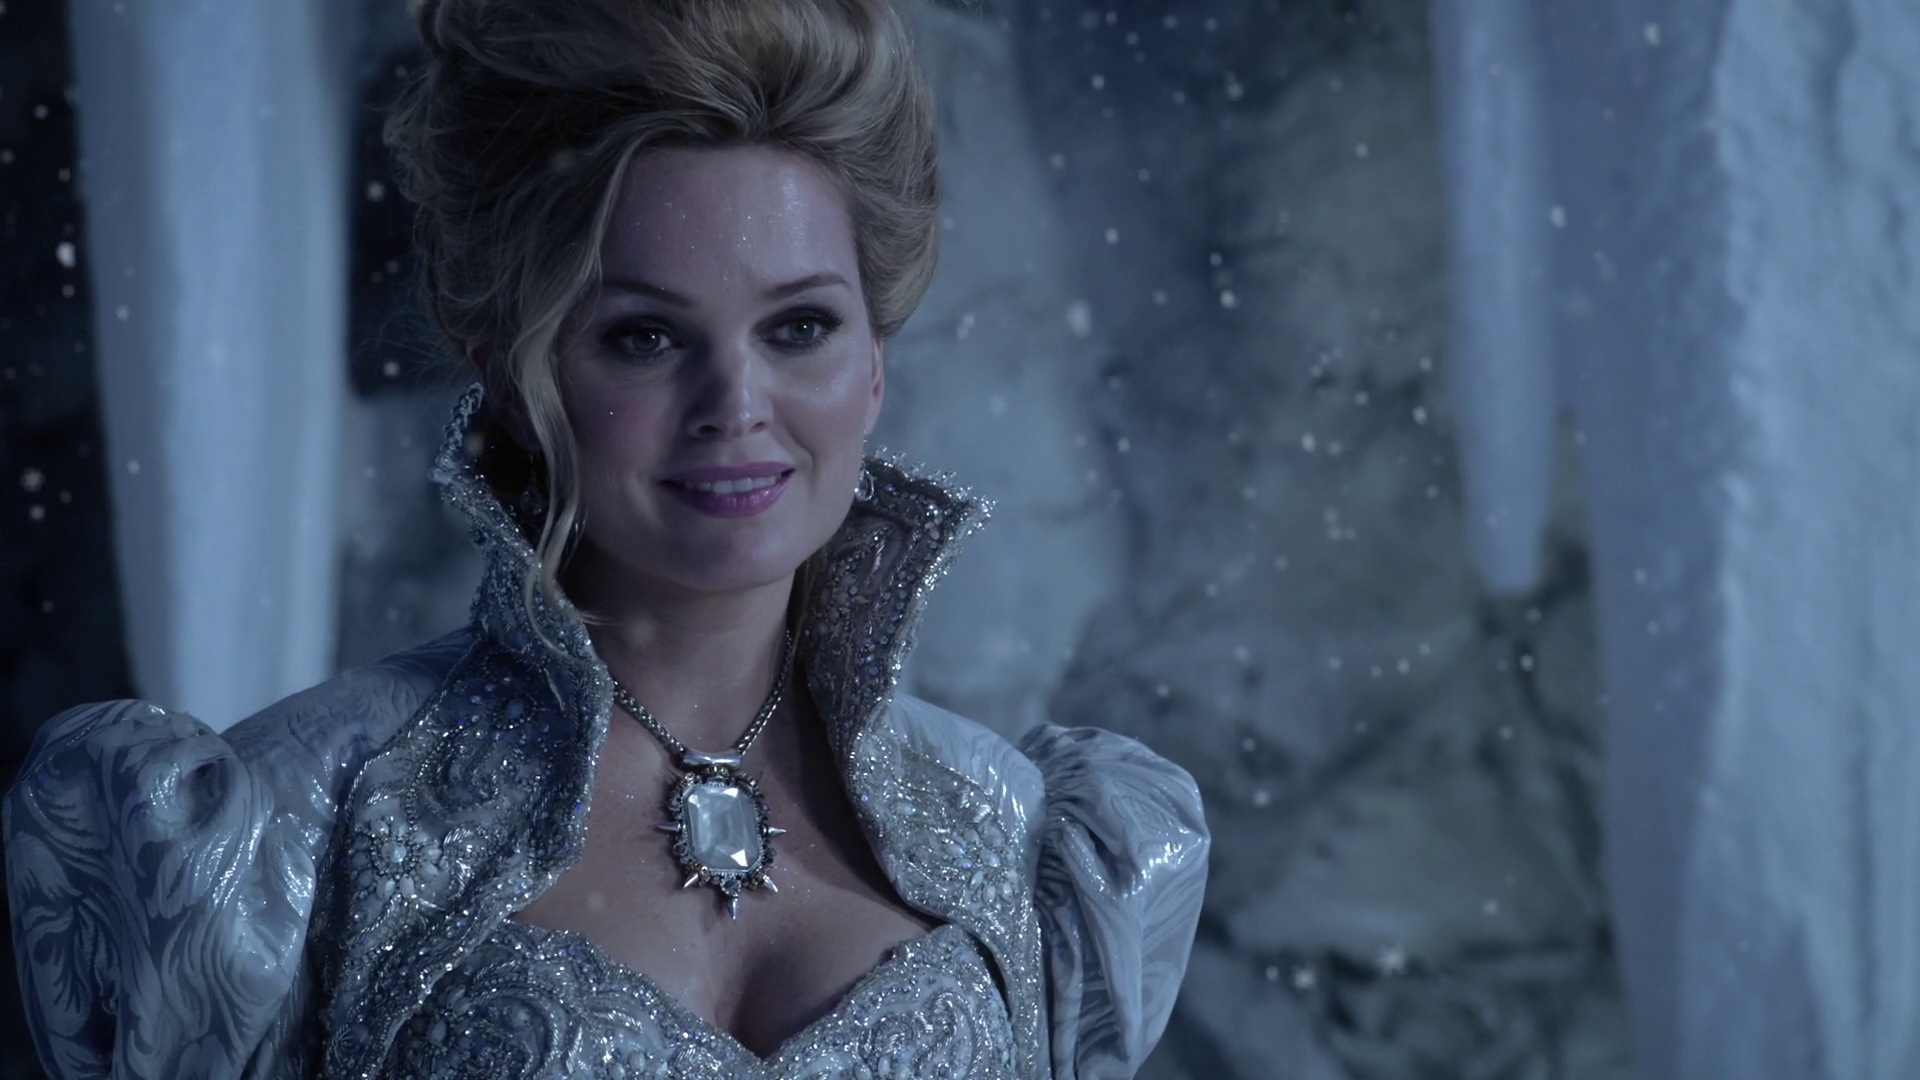 Sunny Mabrey as Glinda ABCs Once Upon a Time A Curious Thing picture.